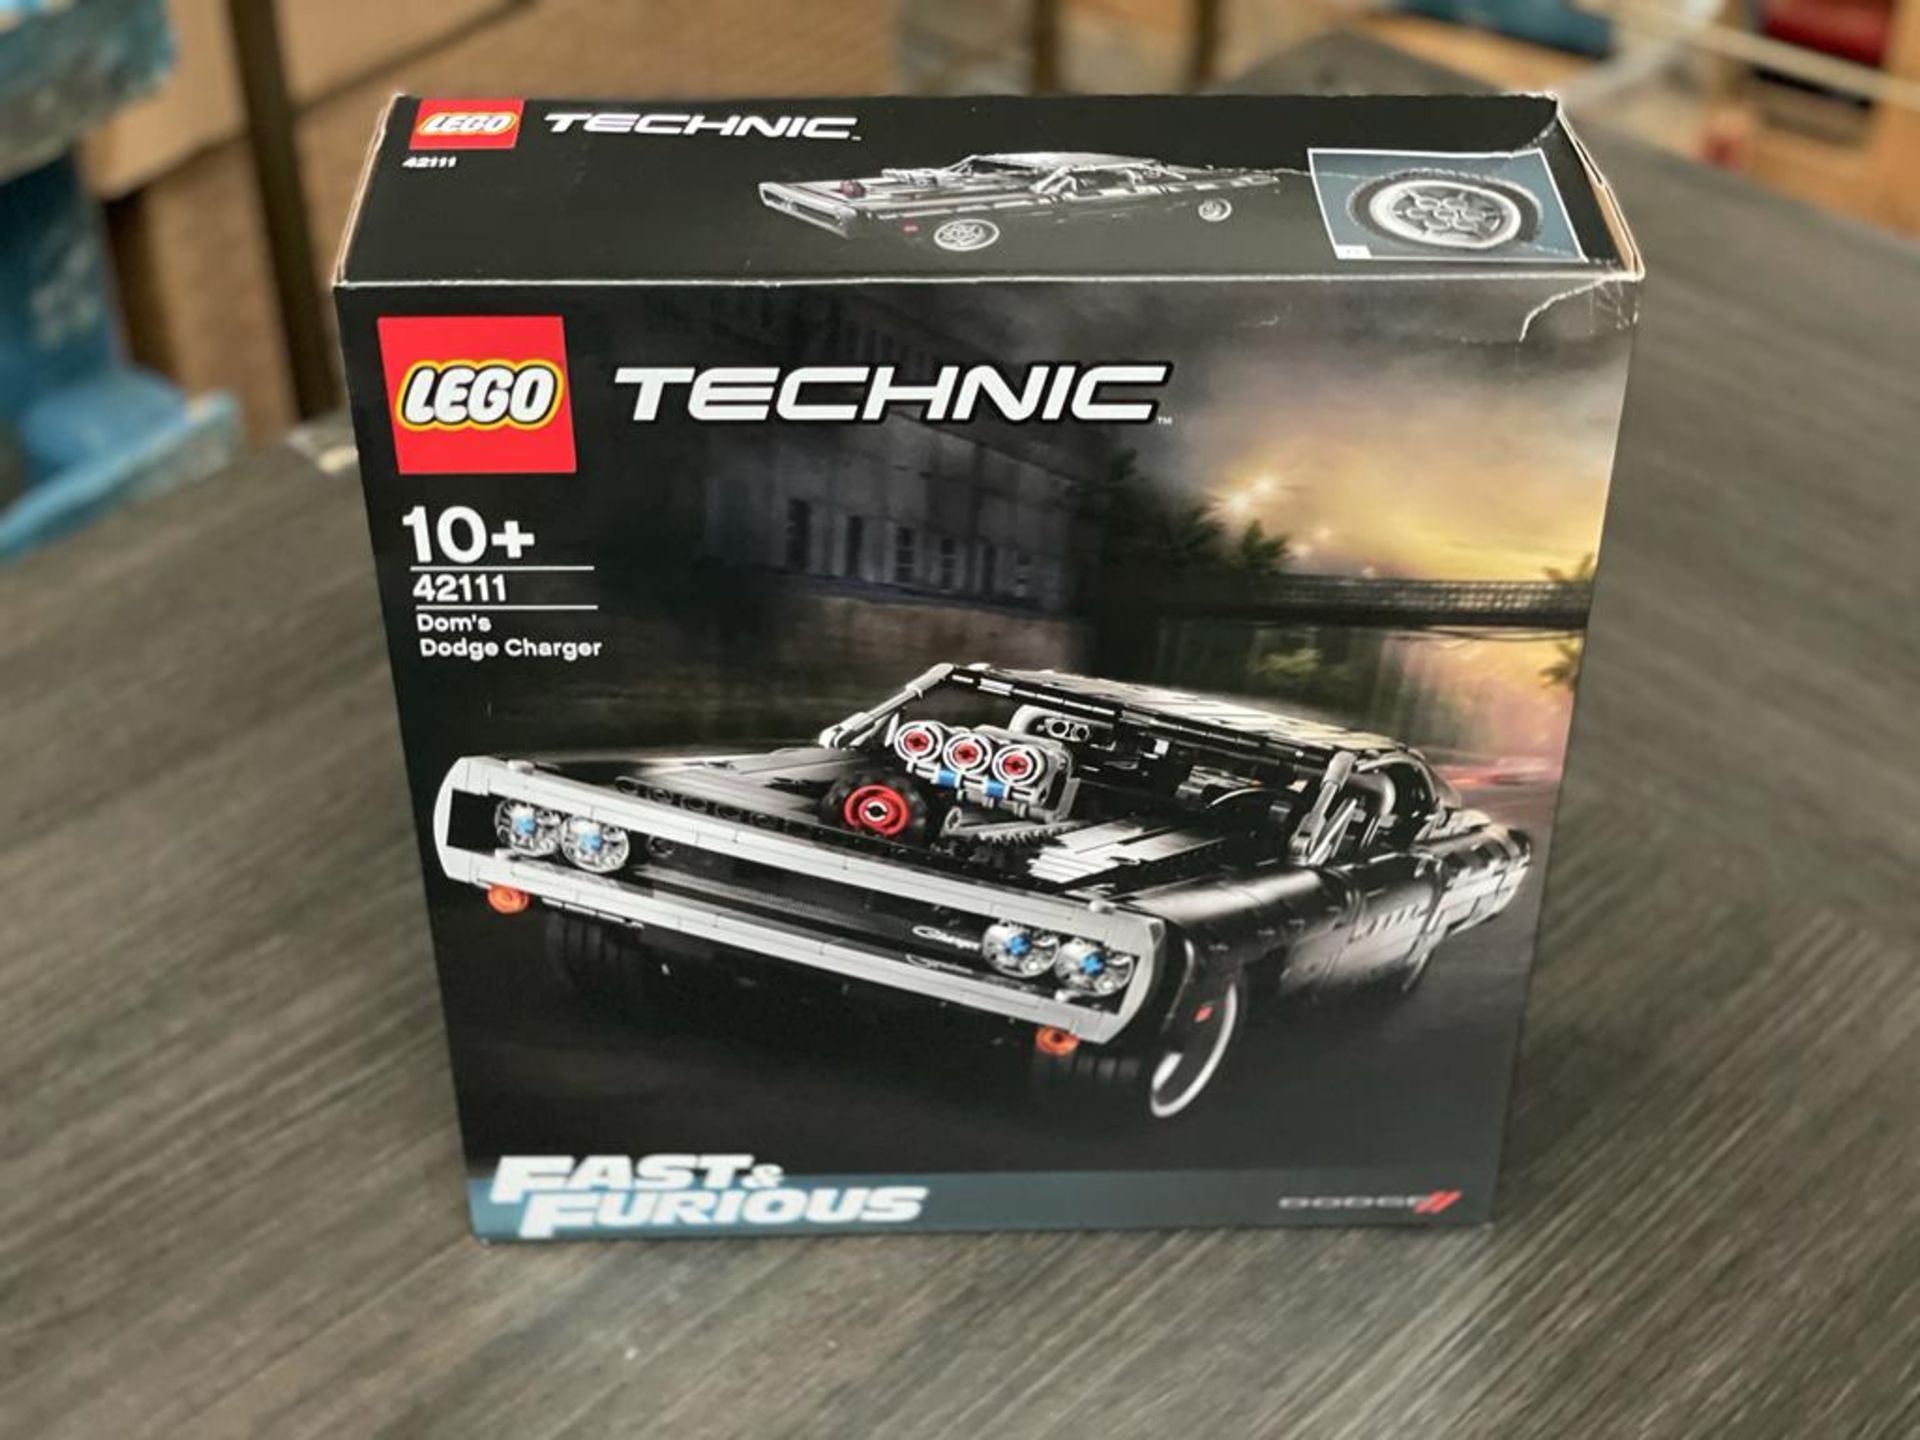 1 x Lego 42111 Technic Fast And Furious Dom's Dodge Charger - Brand New - RRP £120.00 - CL011 - Ref: - Image 3 of 3